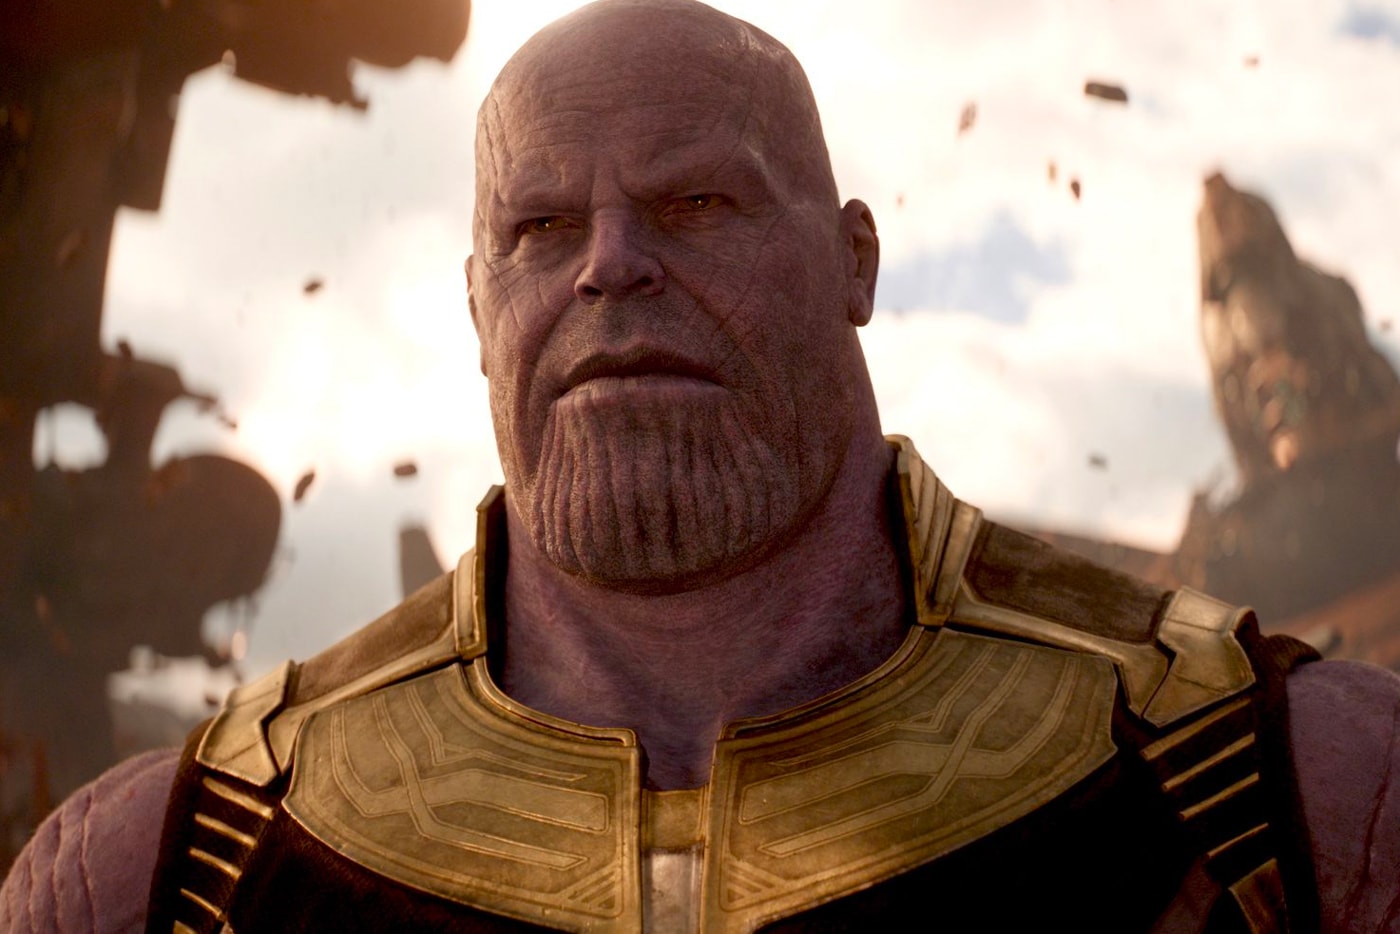 Avengers: Endgame Could Have Had 'The Snap' Instead Of Infinity War, Movies